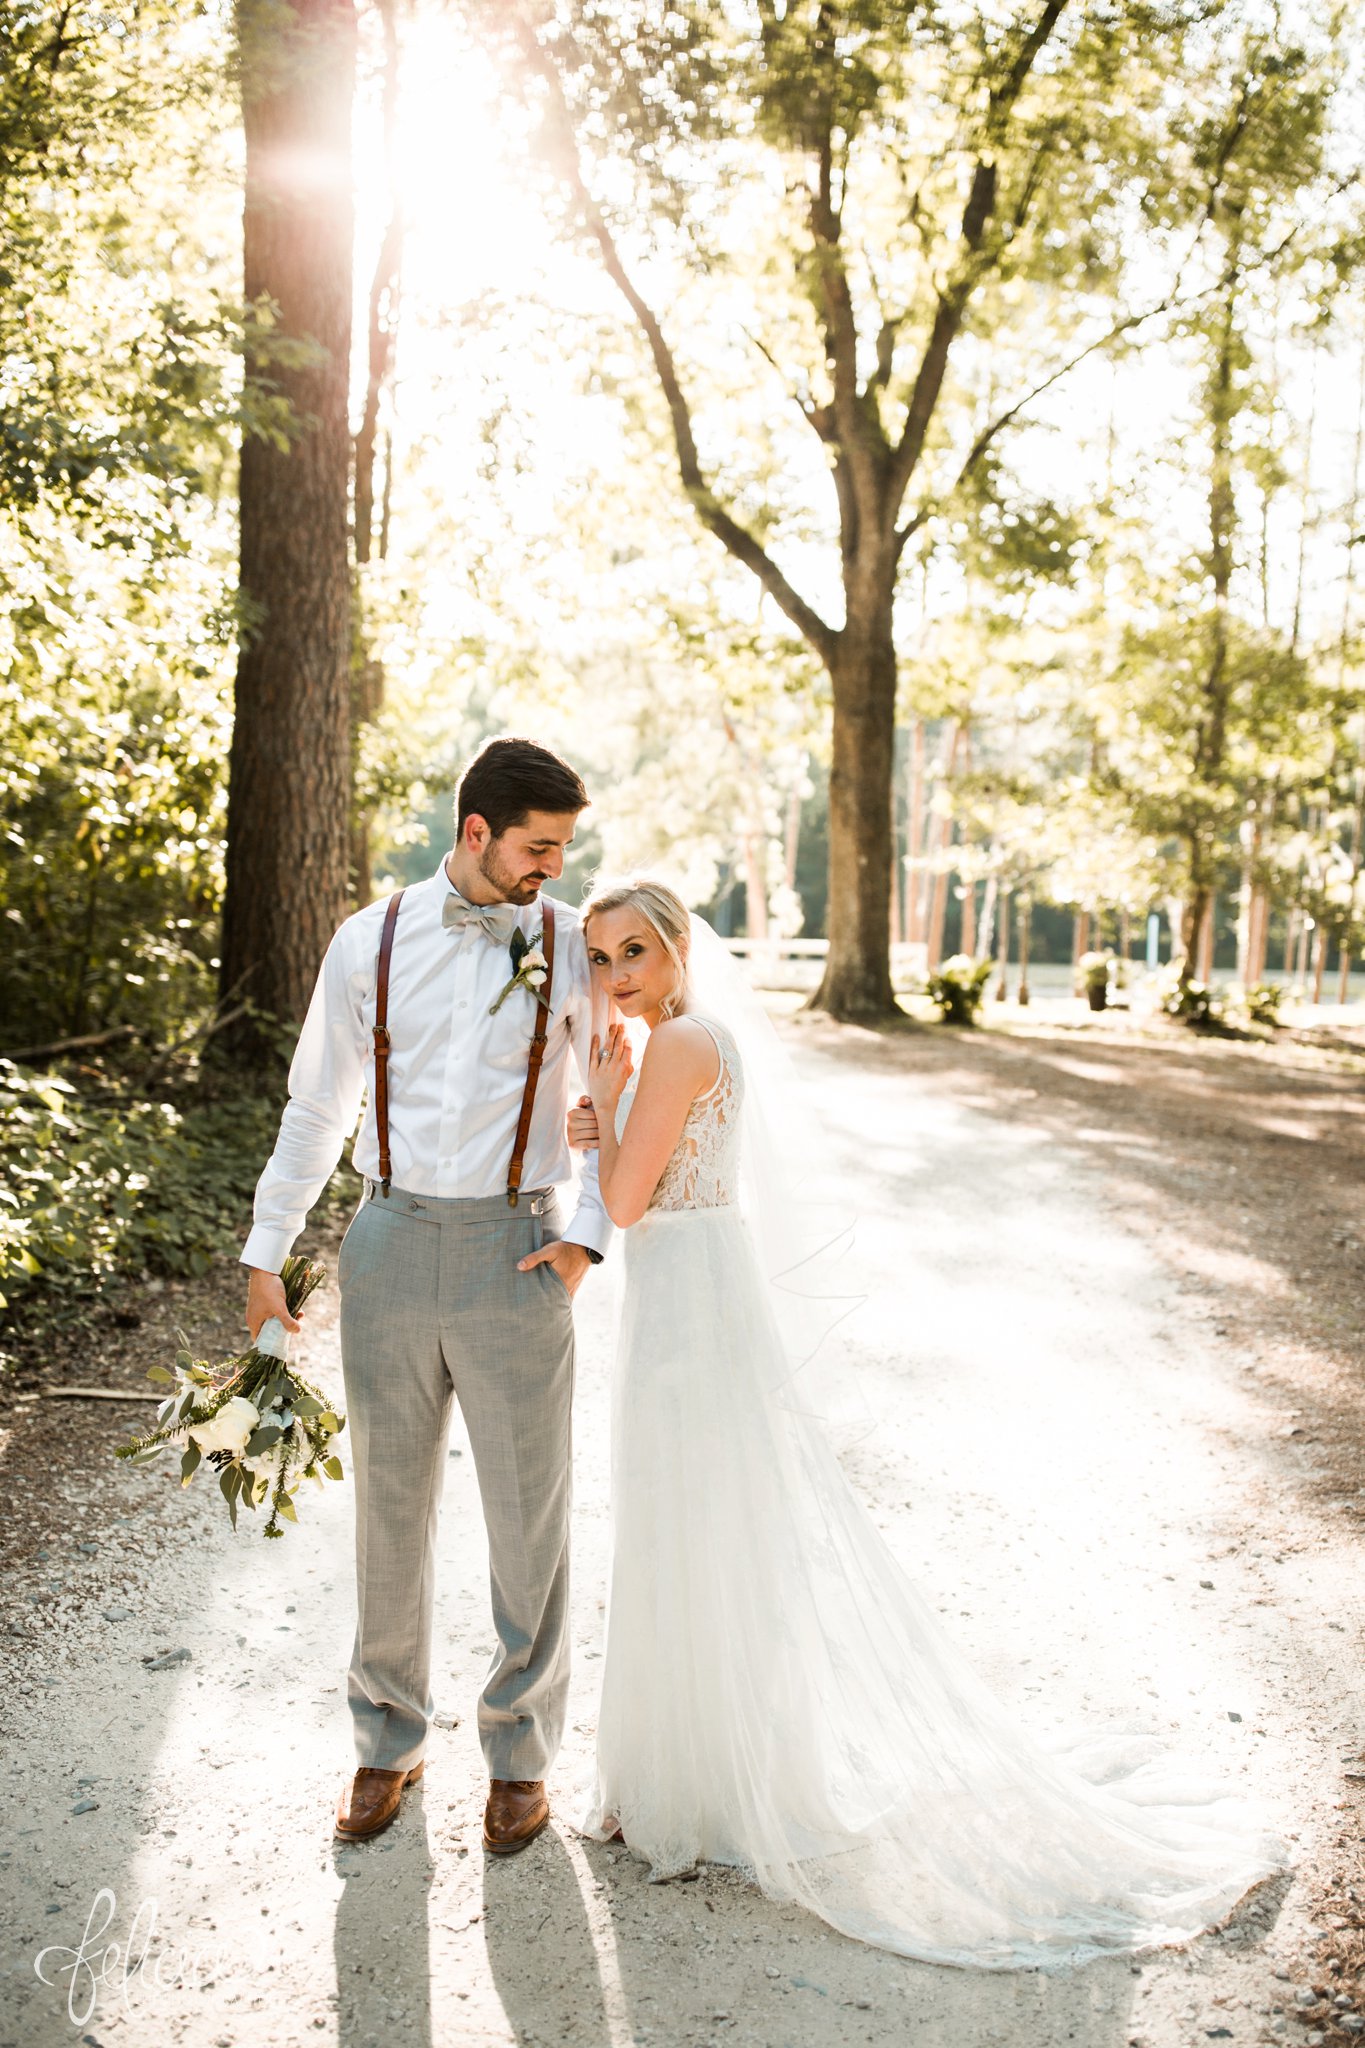 images by feliciathephotographer.com | destination wedding | the makey house | dave gibson coordinator | travel photographer | Savannah, georgia | southern | gravel road | portraits | bride | groom | golden hour | sunset | trees | green | romantic | brown suspenders | lace dress | train | cuddly 